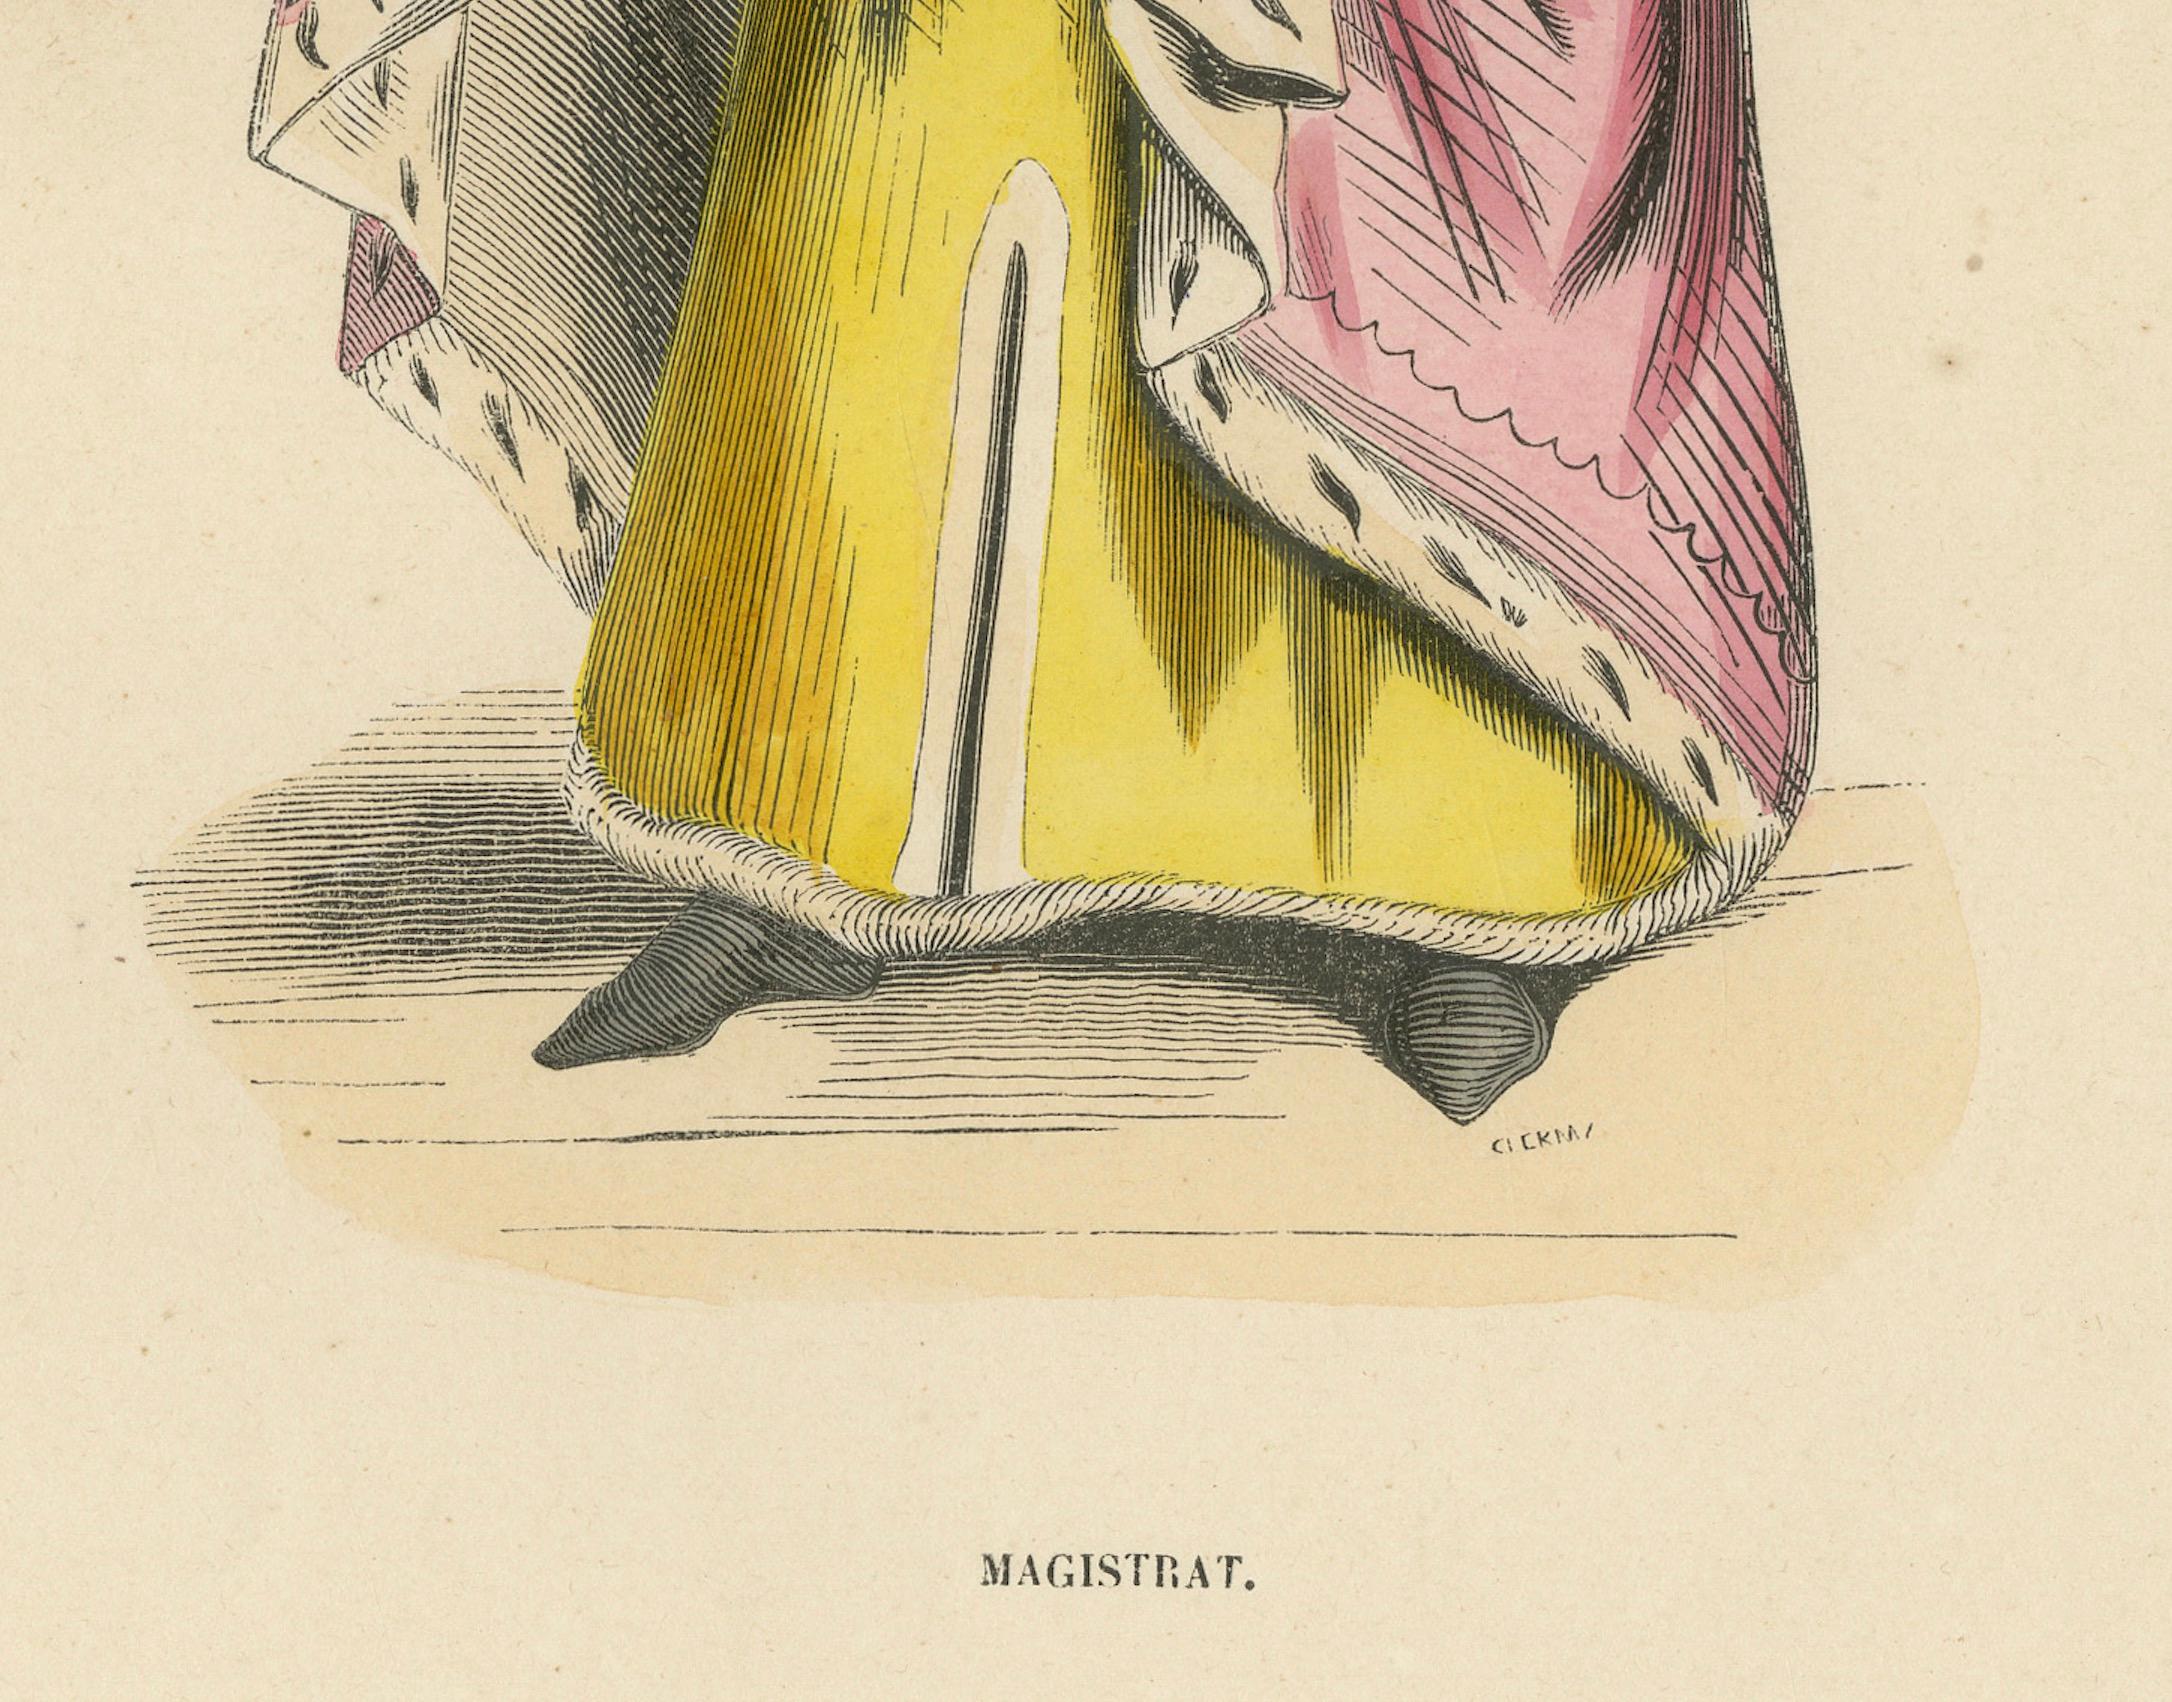 Mid-19th Century The Esteemed Jurist: A Magistrate's Robe in an Original Lithograph, 1847 For Sale